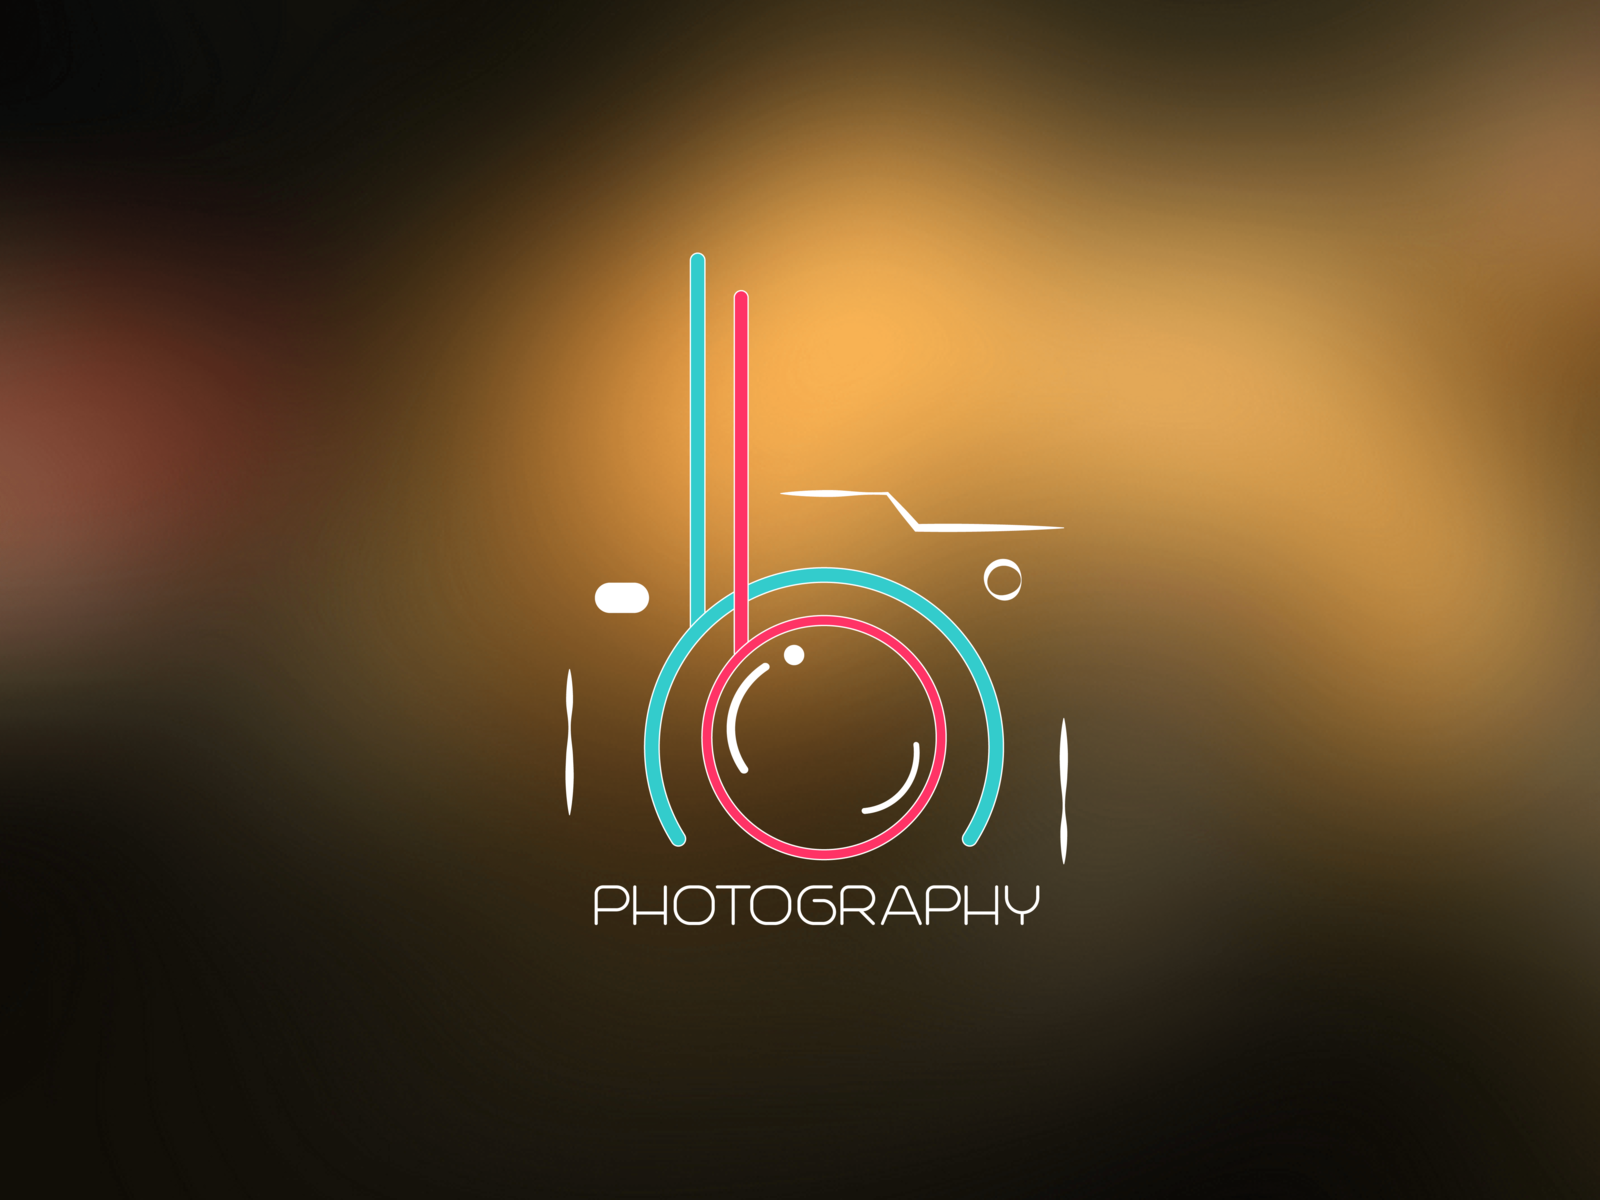 Photography logo - HB Photography by Omama K. on Dribbble